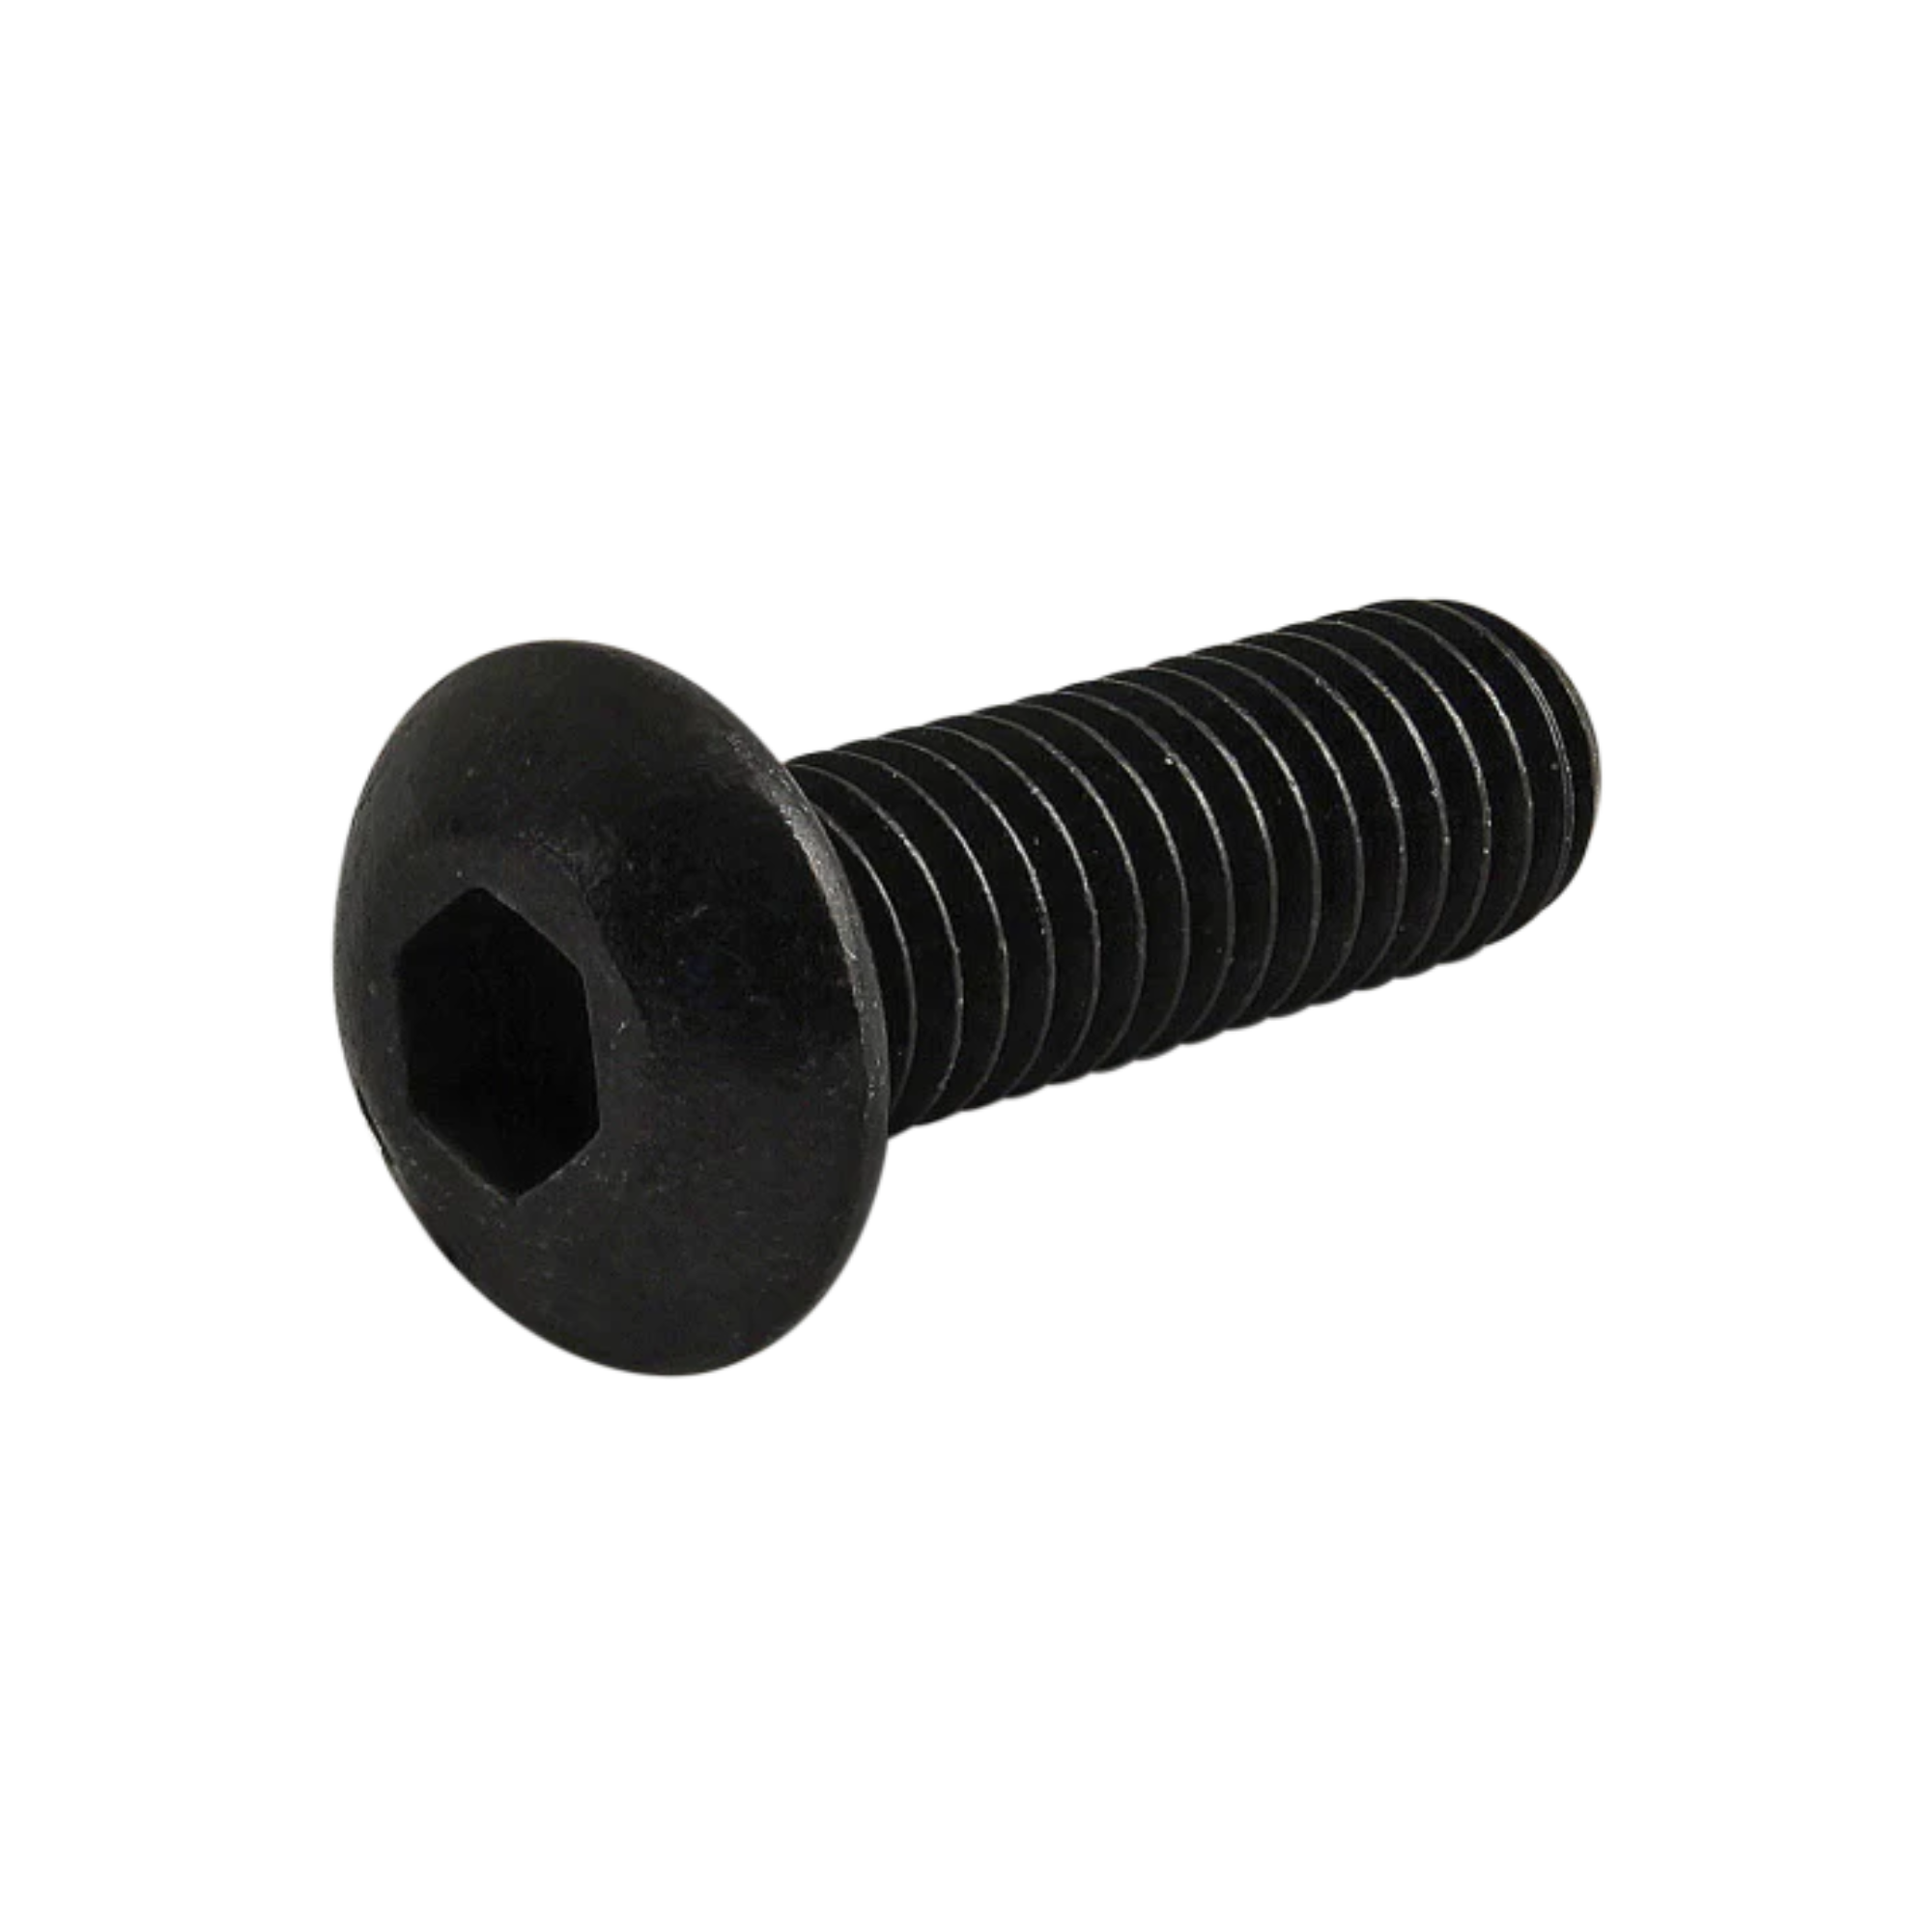 side view of a black button head screw with the head on the left and the threaded stem pointing toward the right